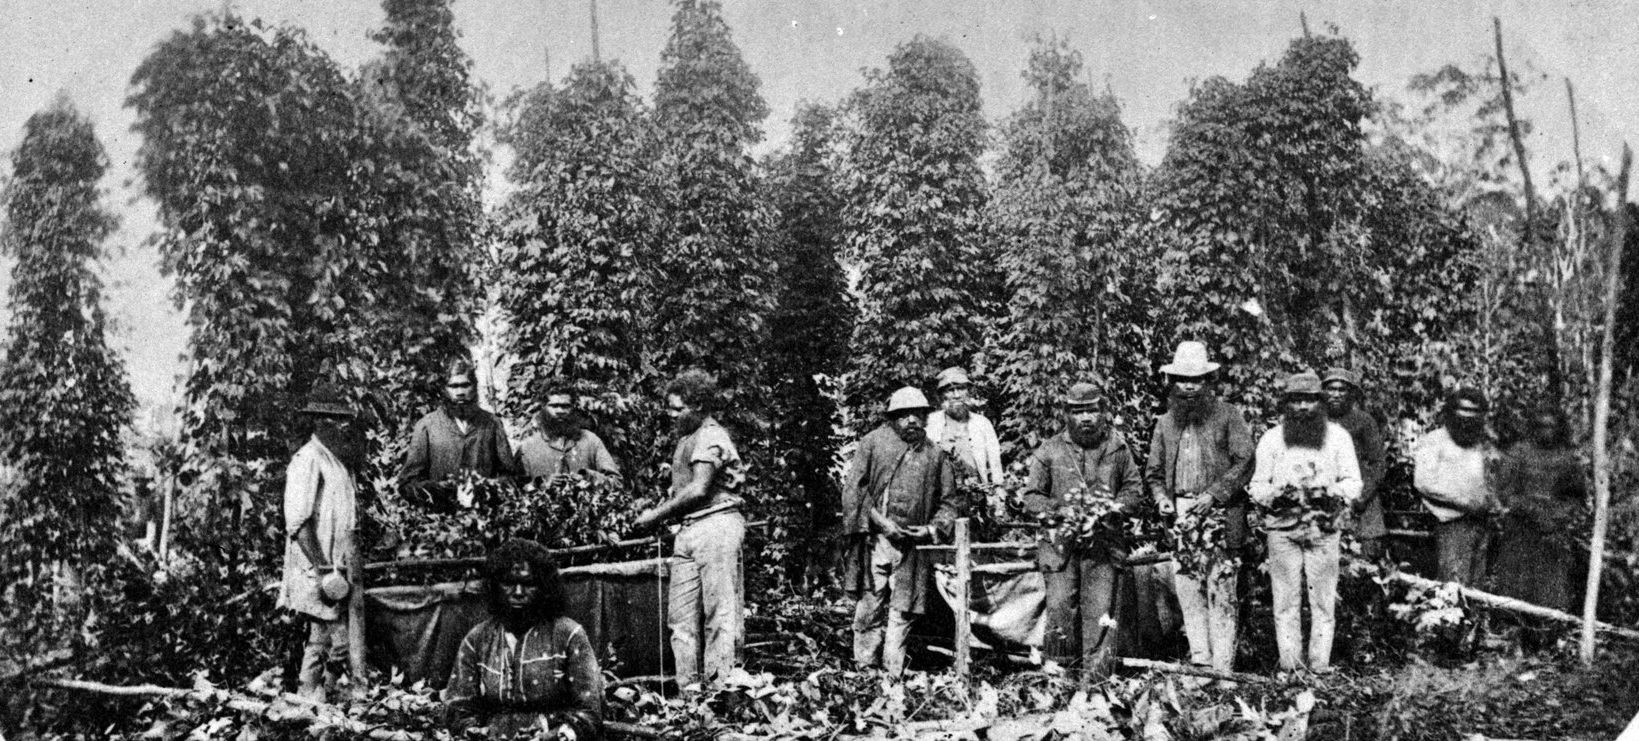 A group of First Nations people in a garden